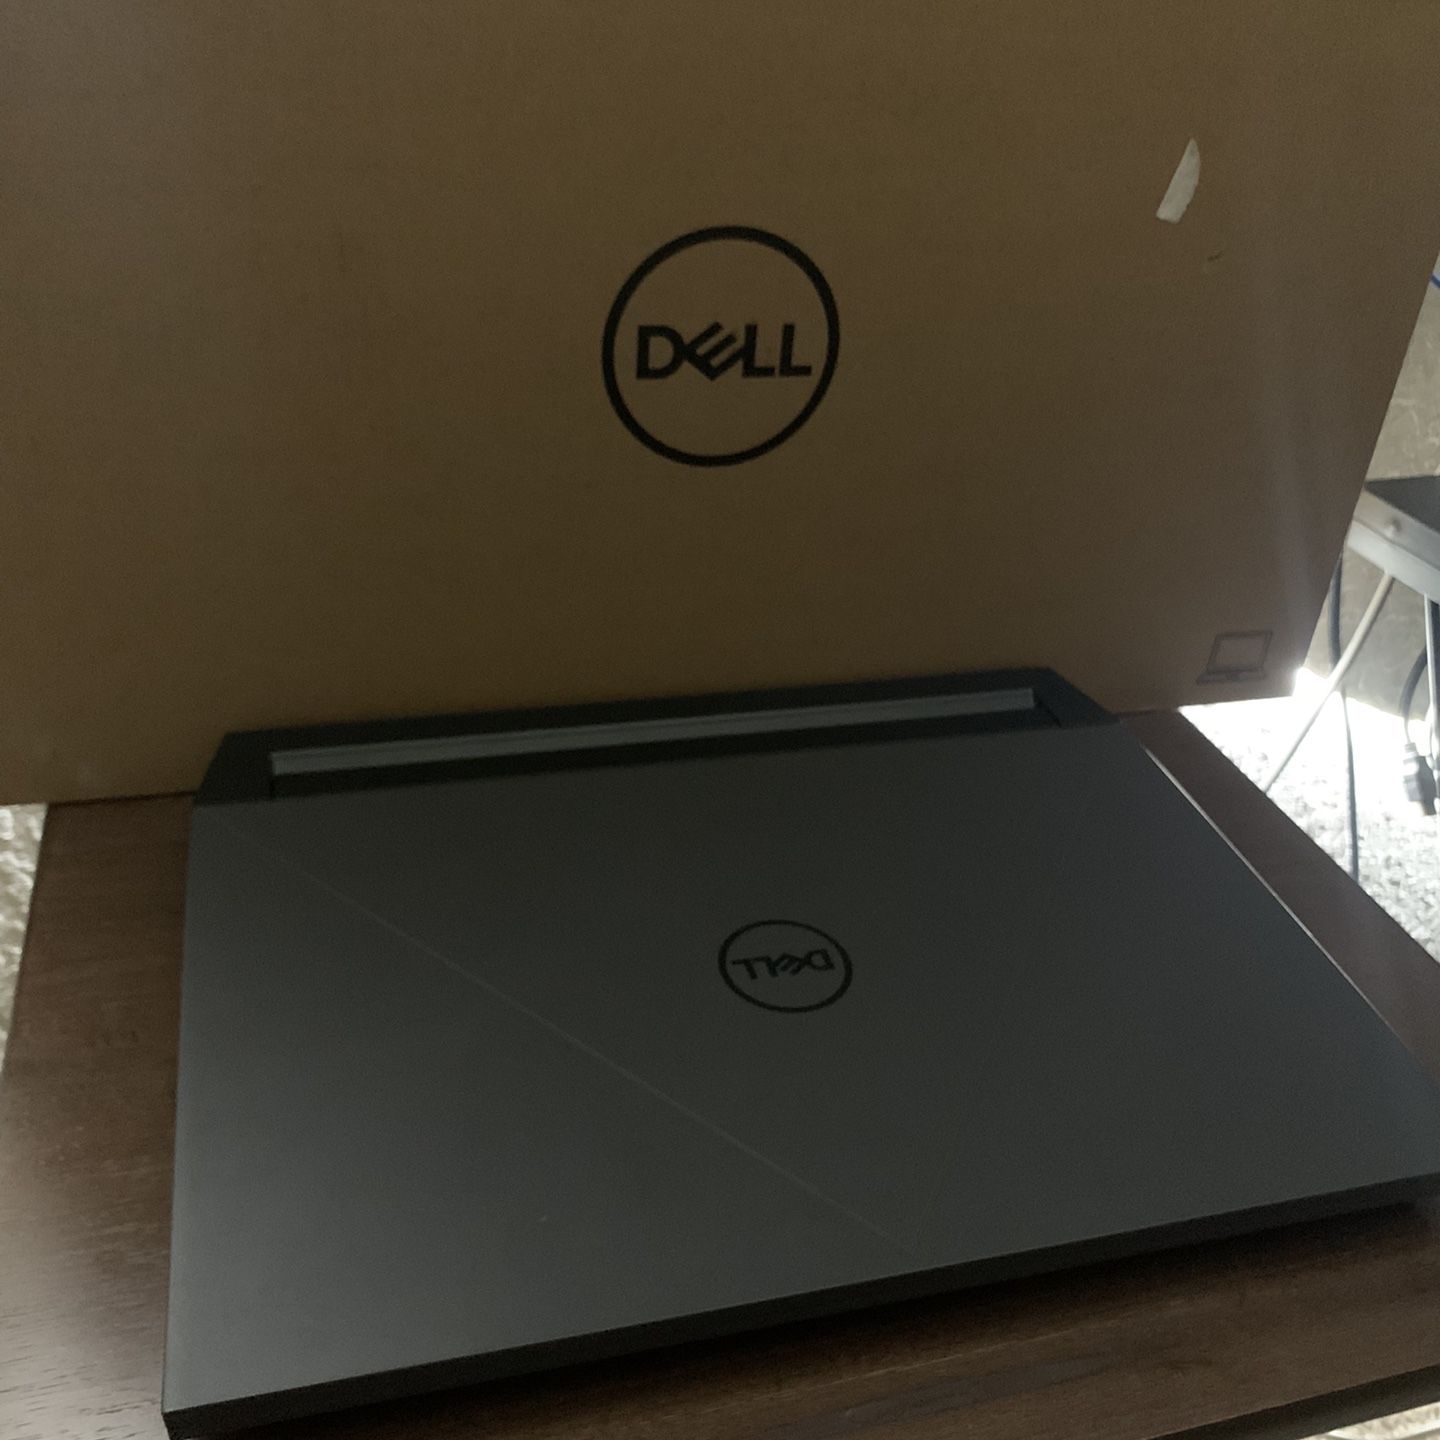 DELL G15 Gaming Laptop